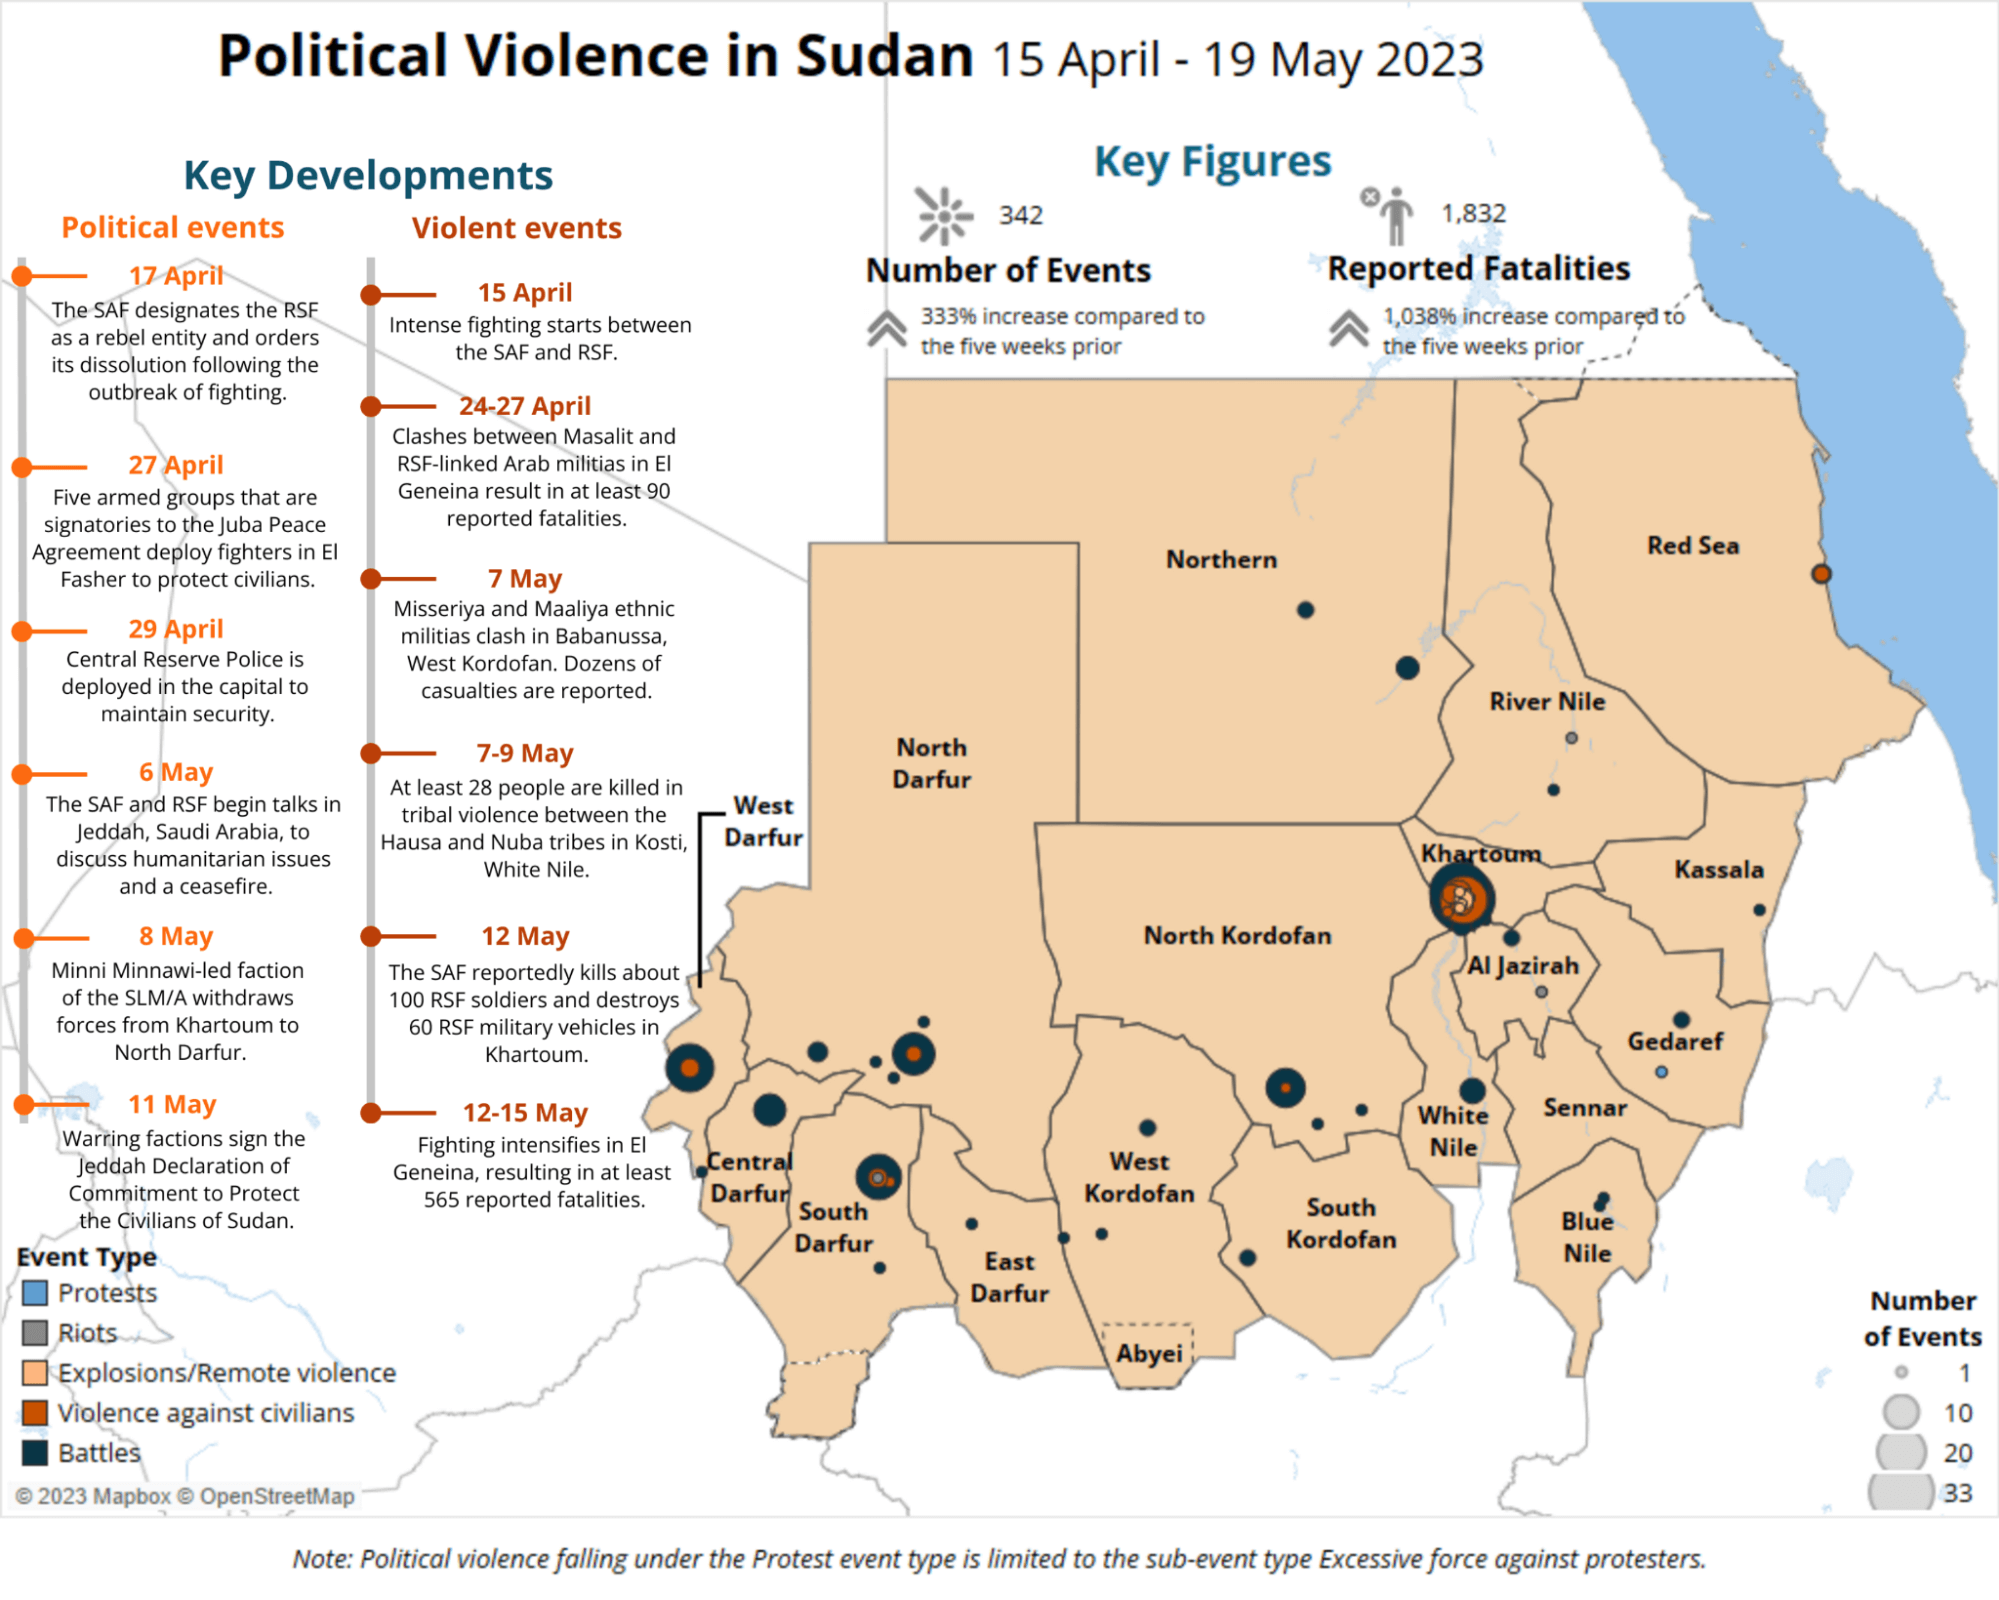 Map of Sudan plotting key events, and listing a timeline of key developments